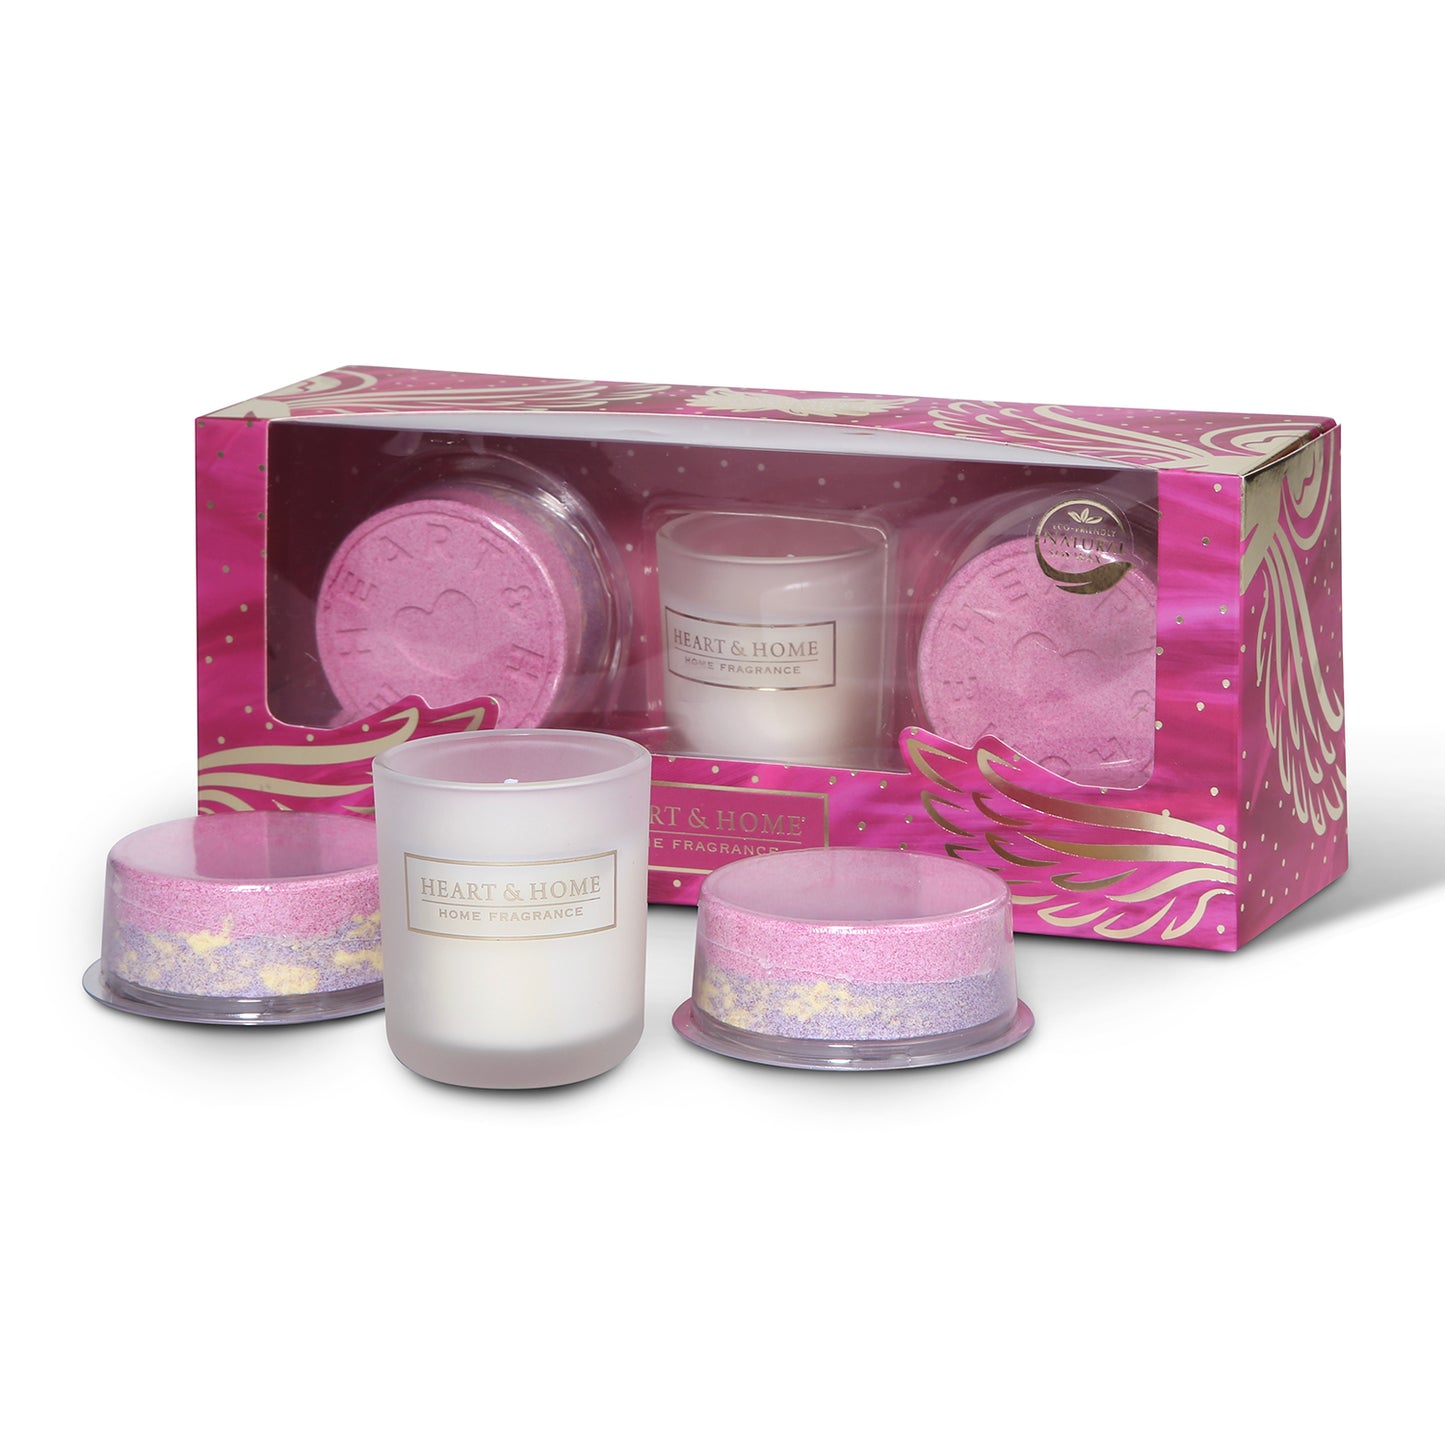 Heart & Home Guardian Angel Candle & Bath Bomb Gift Set In Gift Box